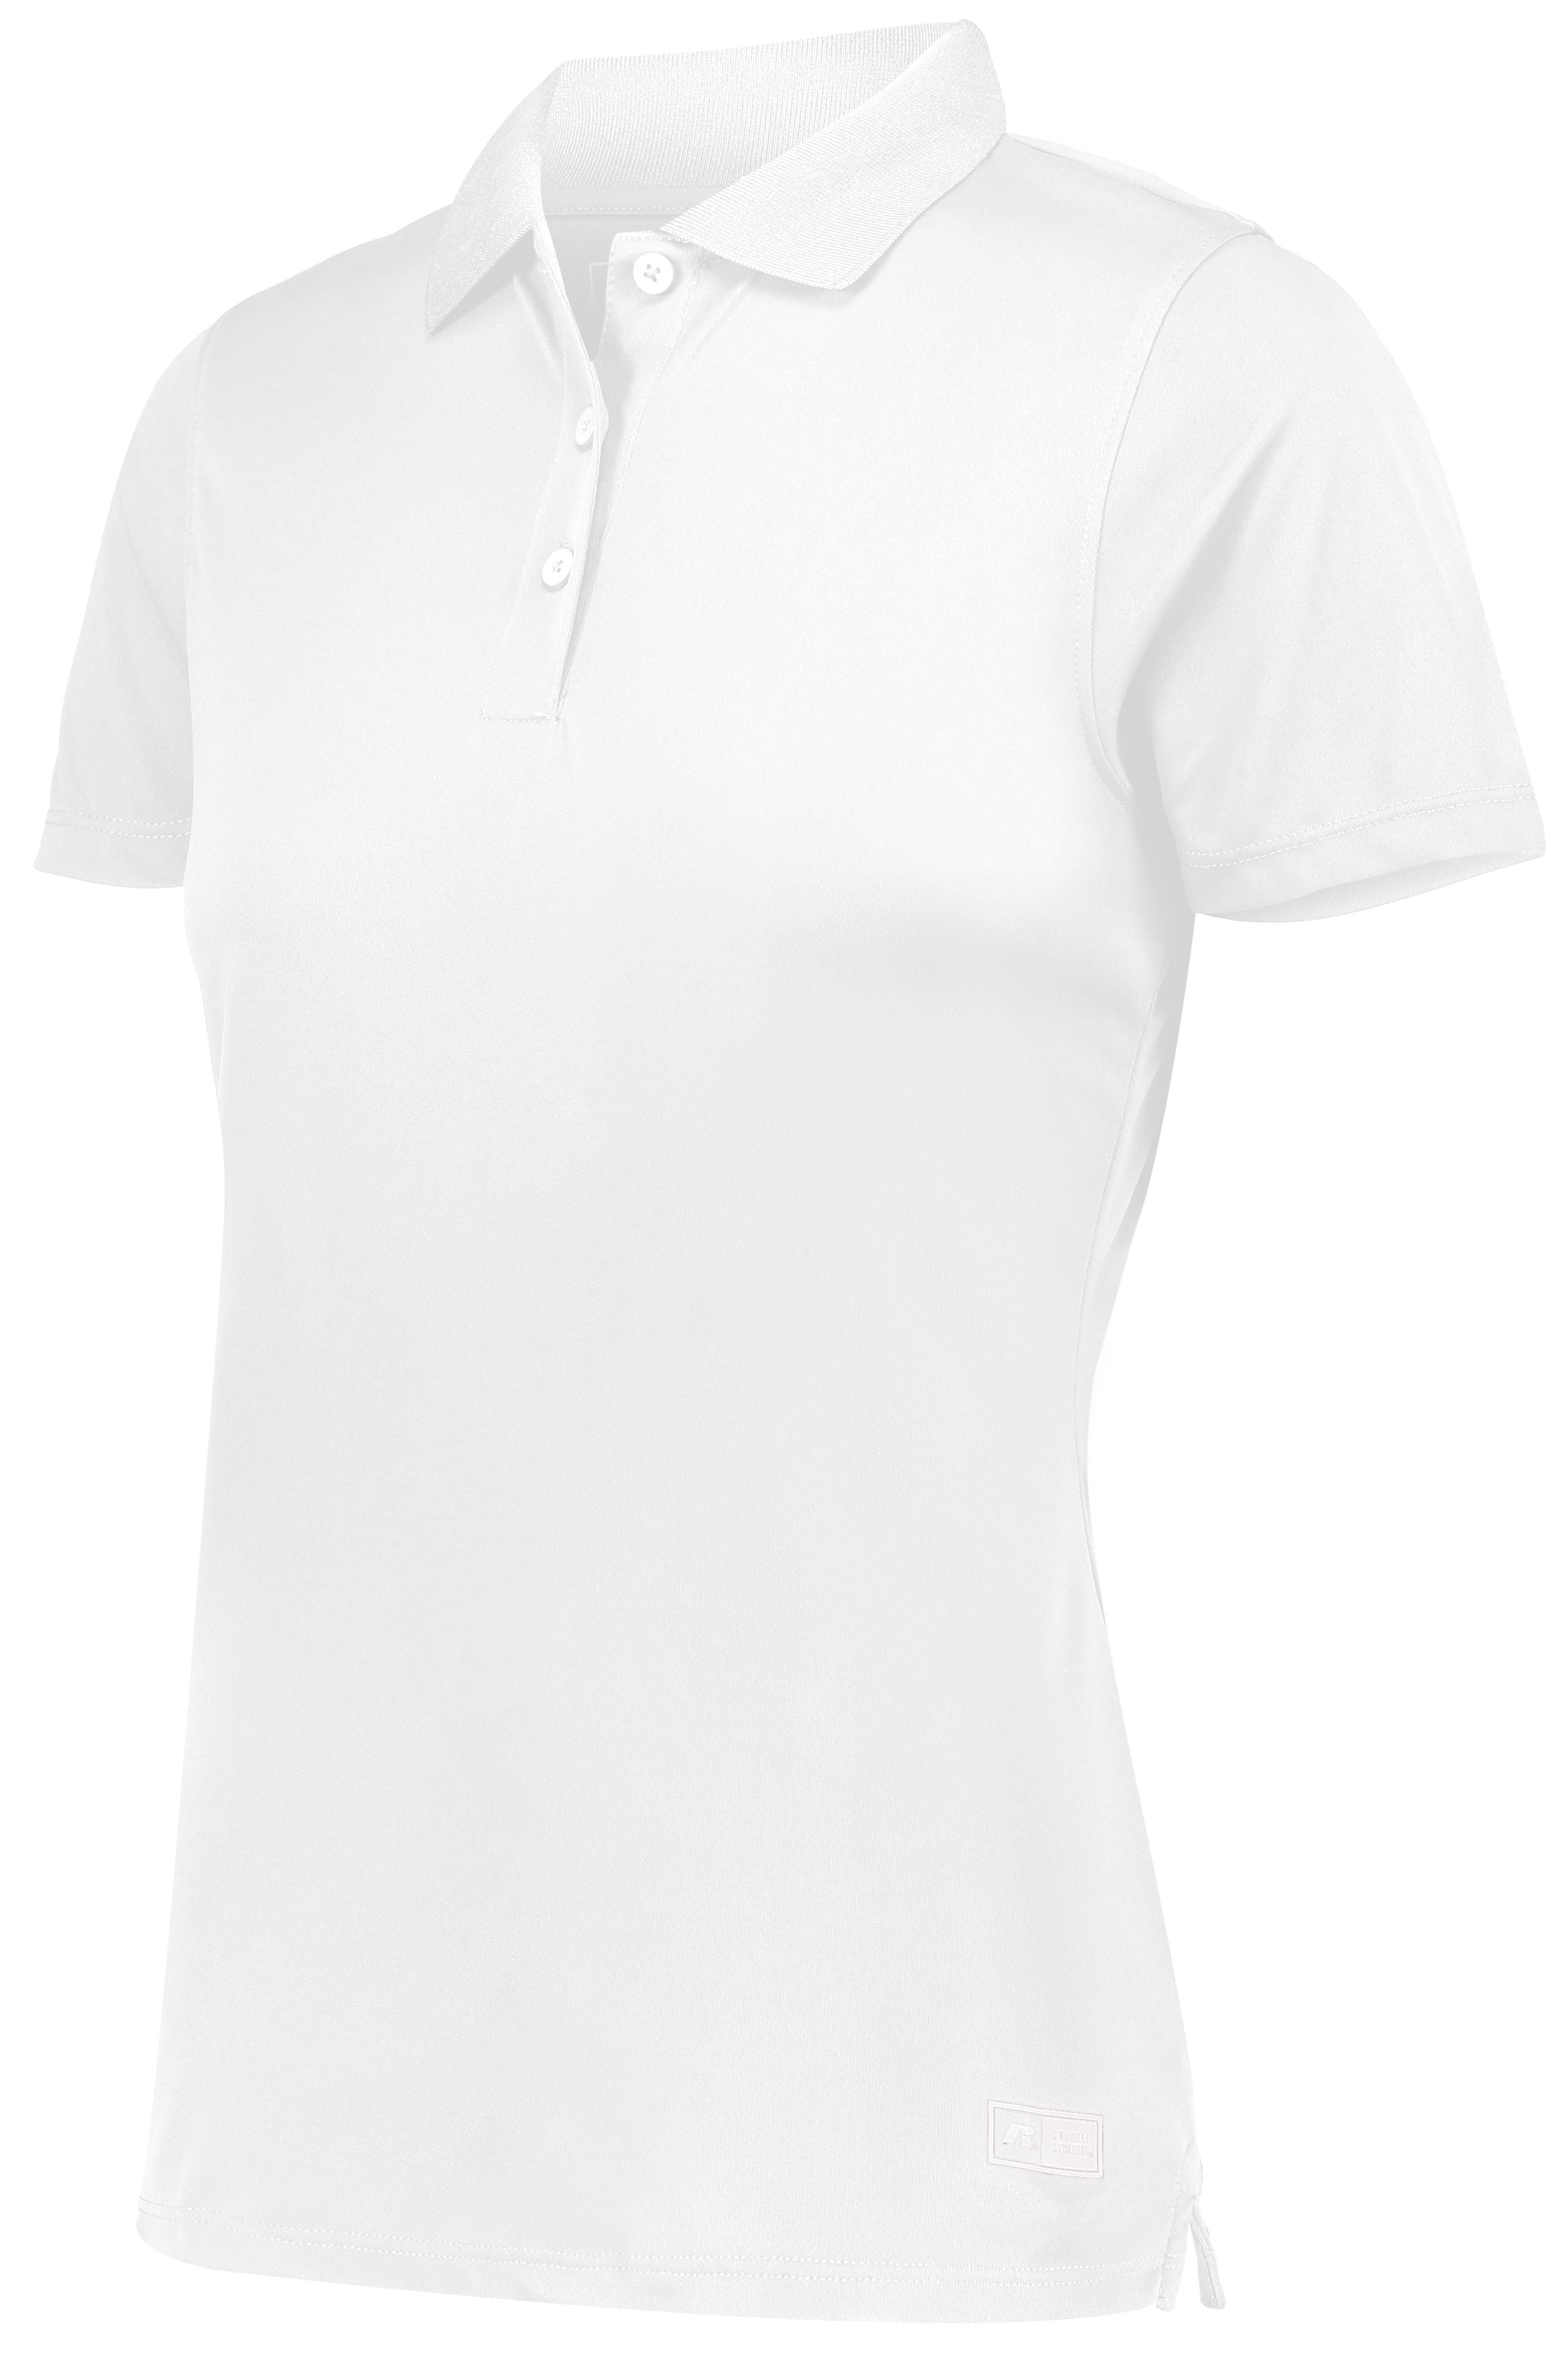 Russell Athletic Ladies Essential Polo in White  -Part of the Ladies, Ladies-Polo, Polos, Russell-Athletic-Products, Shirts, Corporate-Collection product lines at KanaleyCreations.com